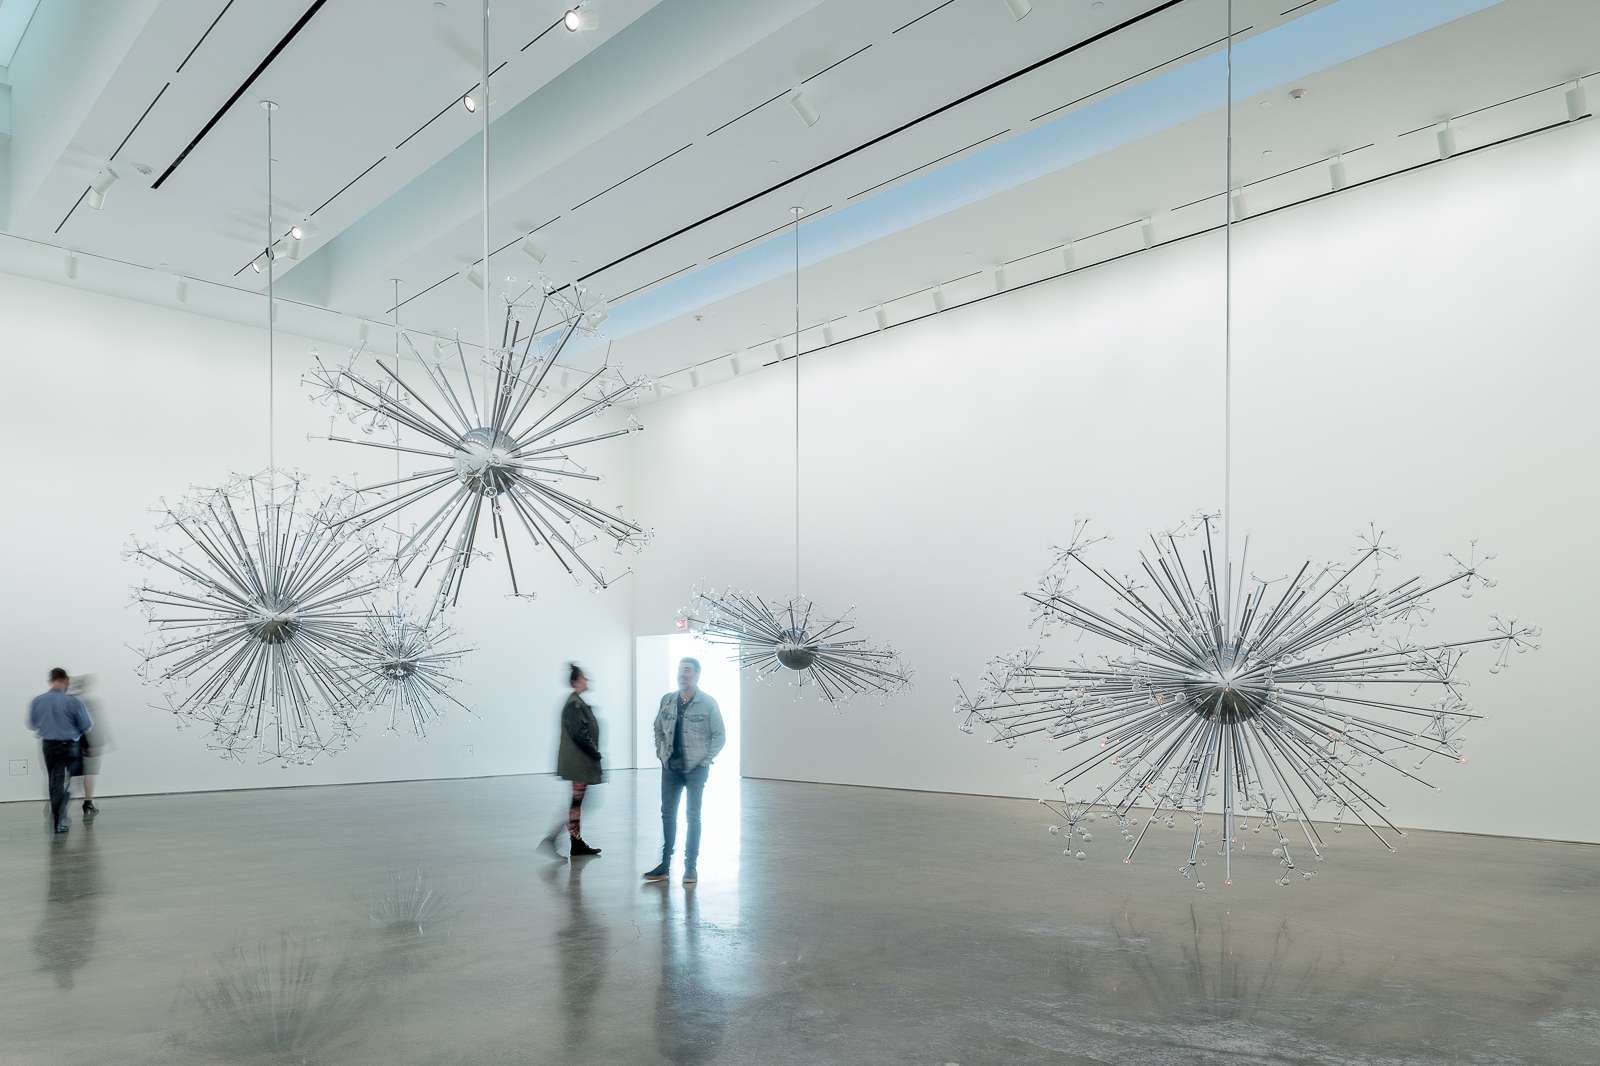 Installation view of Island Universe by Josiah McElheny, 2008. Chrome plated aluminum, handblown and molded glass, electric lighting, and rigging. Dimensions variable. Courtesy the artist. Photo: Nash Baker